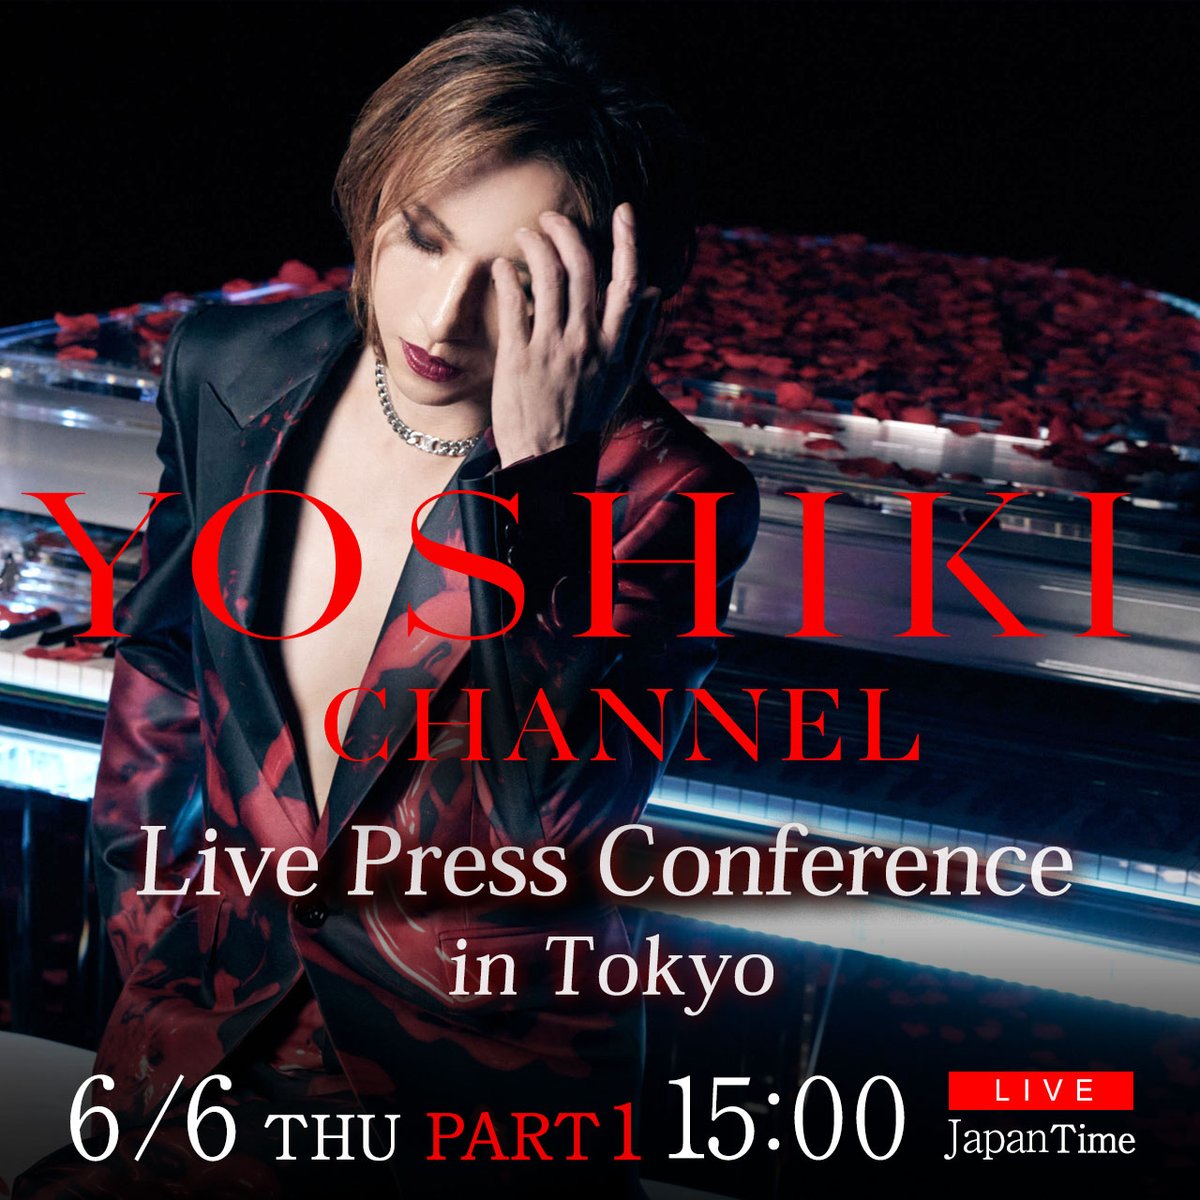 🎥 IN 4 DAYS 🎥

June 6th from 3pm Japan Time
#YOSHIKI will make an announcement at a press conference in Tokyo, live on #YOSHIKICHANNEL!

YouTube (Japanese or Bilingual)
youtube.com/live/HqDLWSIEU…

niconico (Japanese)
ch.nicovideo.jp/yoshikiofficia…

Don't miss it!

@YoshikiOfficial